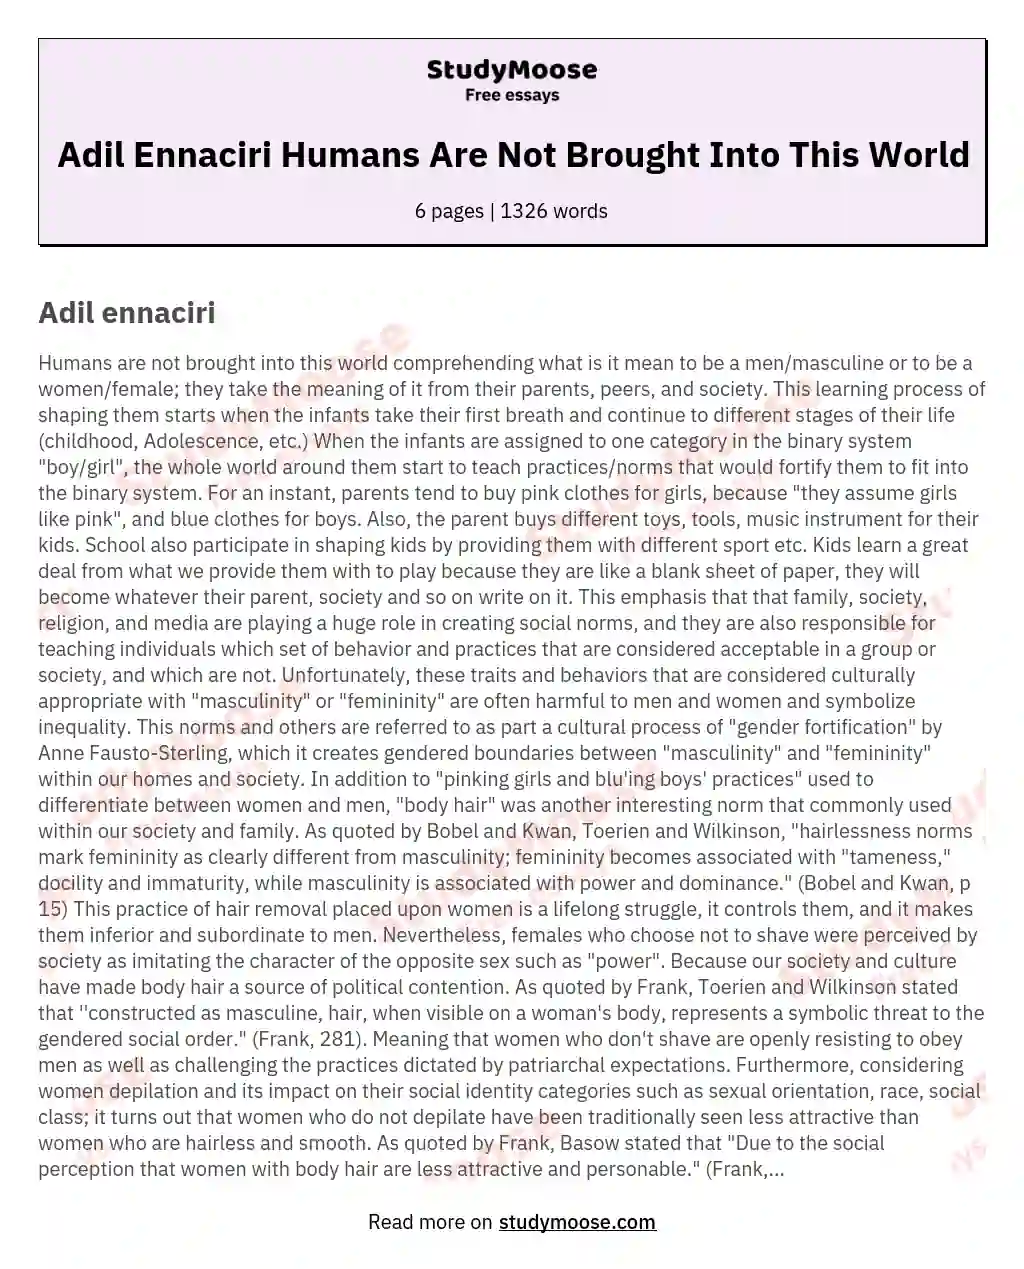 Adil Ennaciri Humans Are Not Brought Into This World